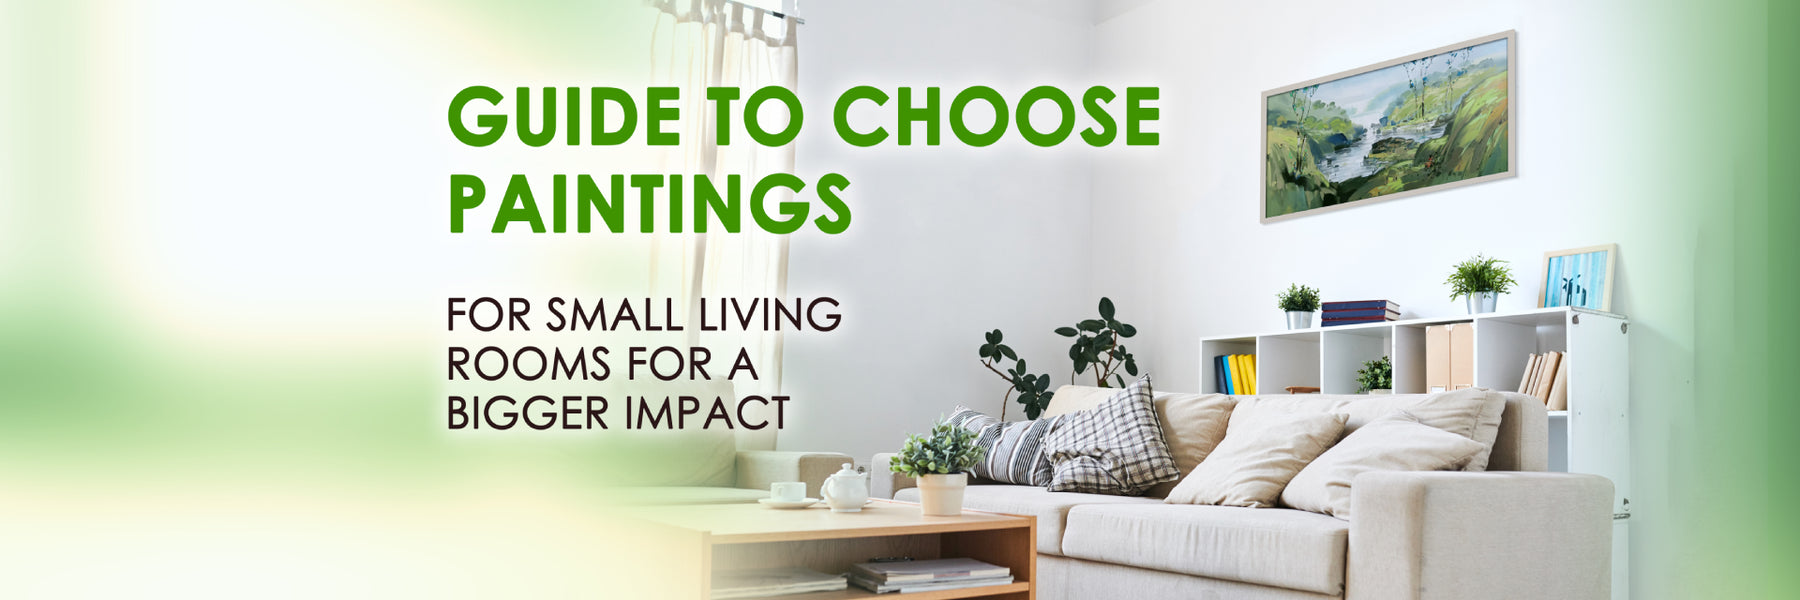 Guide to Choose Paintings for Small Living Rooms for a Bigger Impact